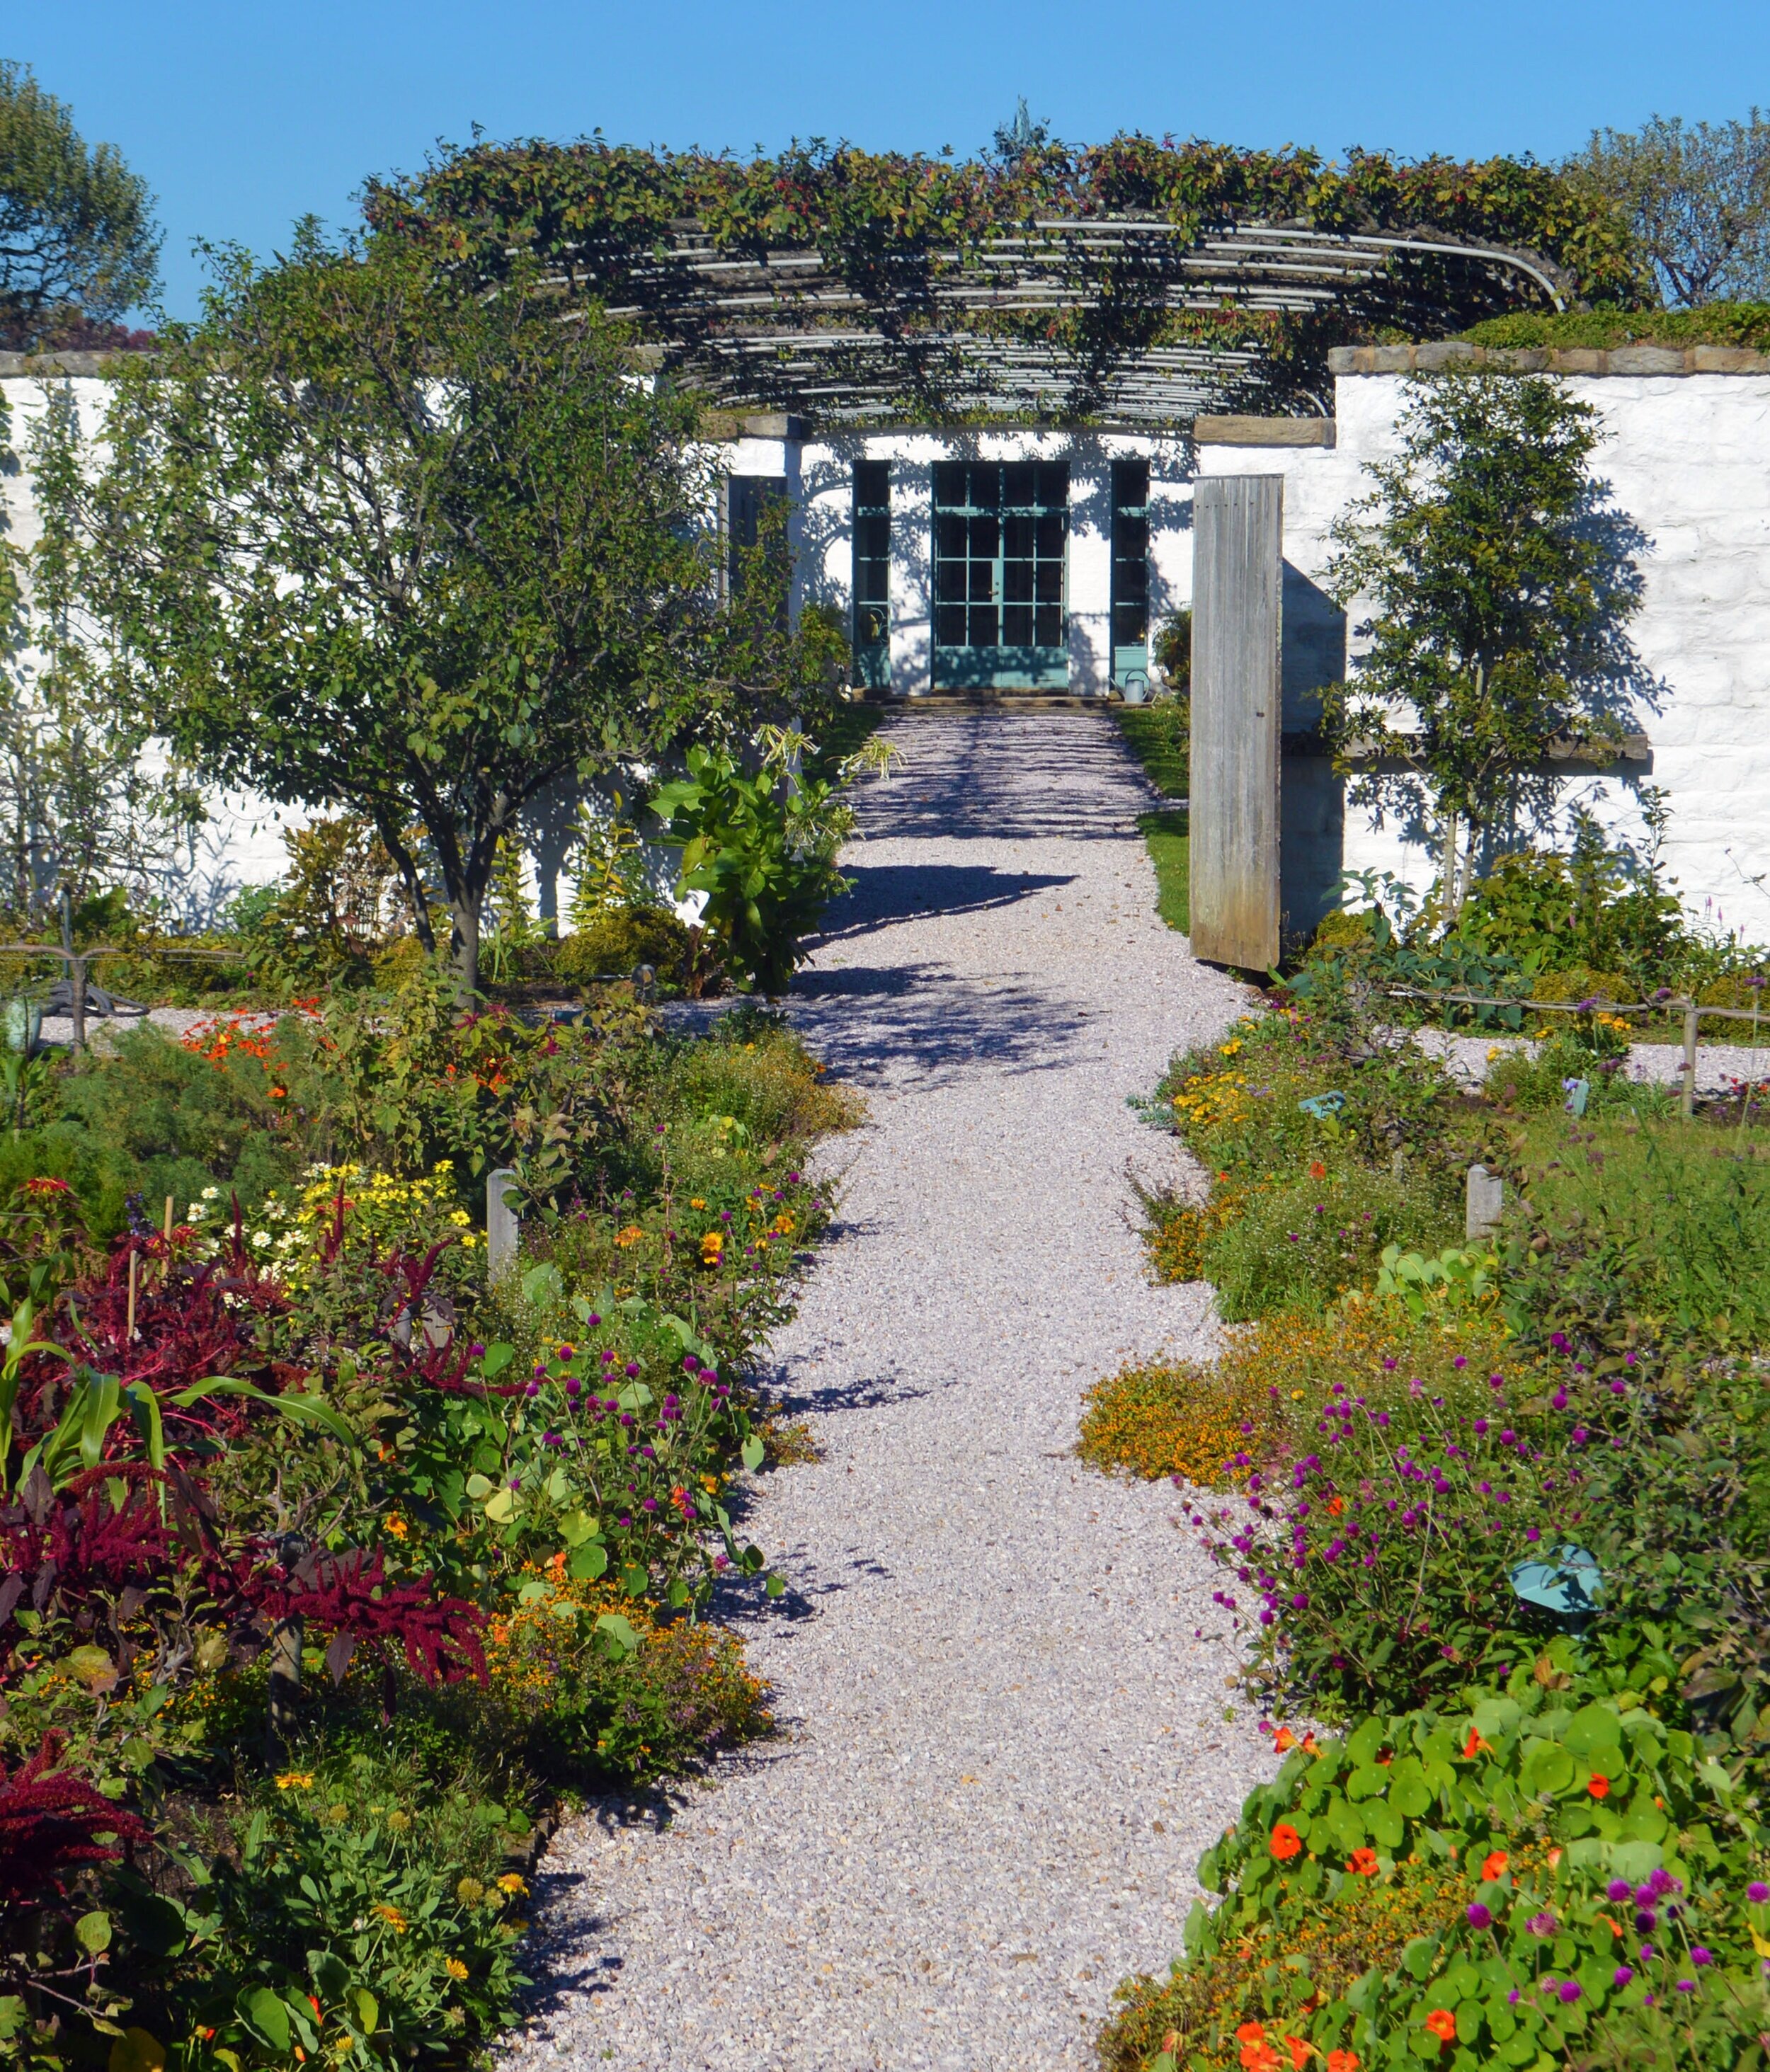  As fall descends on Oak Spring, the formal garden begins to change color: different from the spring and summer, but still as beautiful as ever. Plants like ornamental peppers and mums cast it in autumnal hues of red, orange, and dark green. 